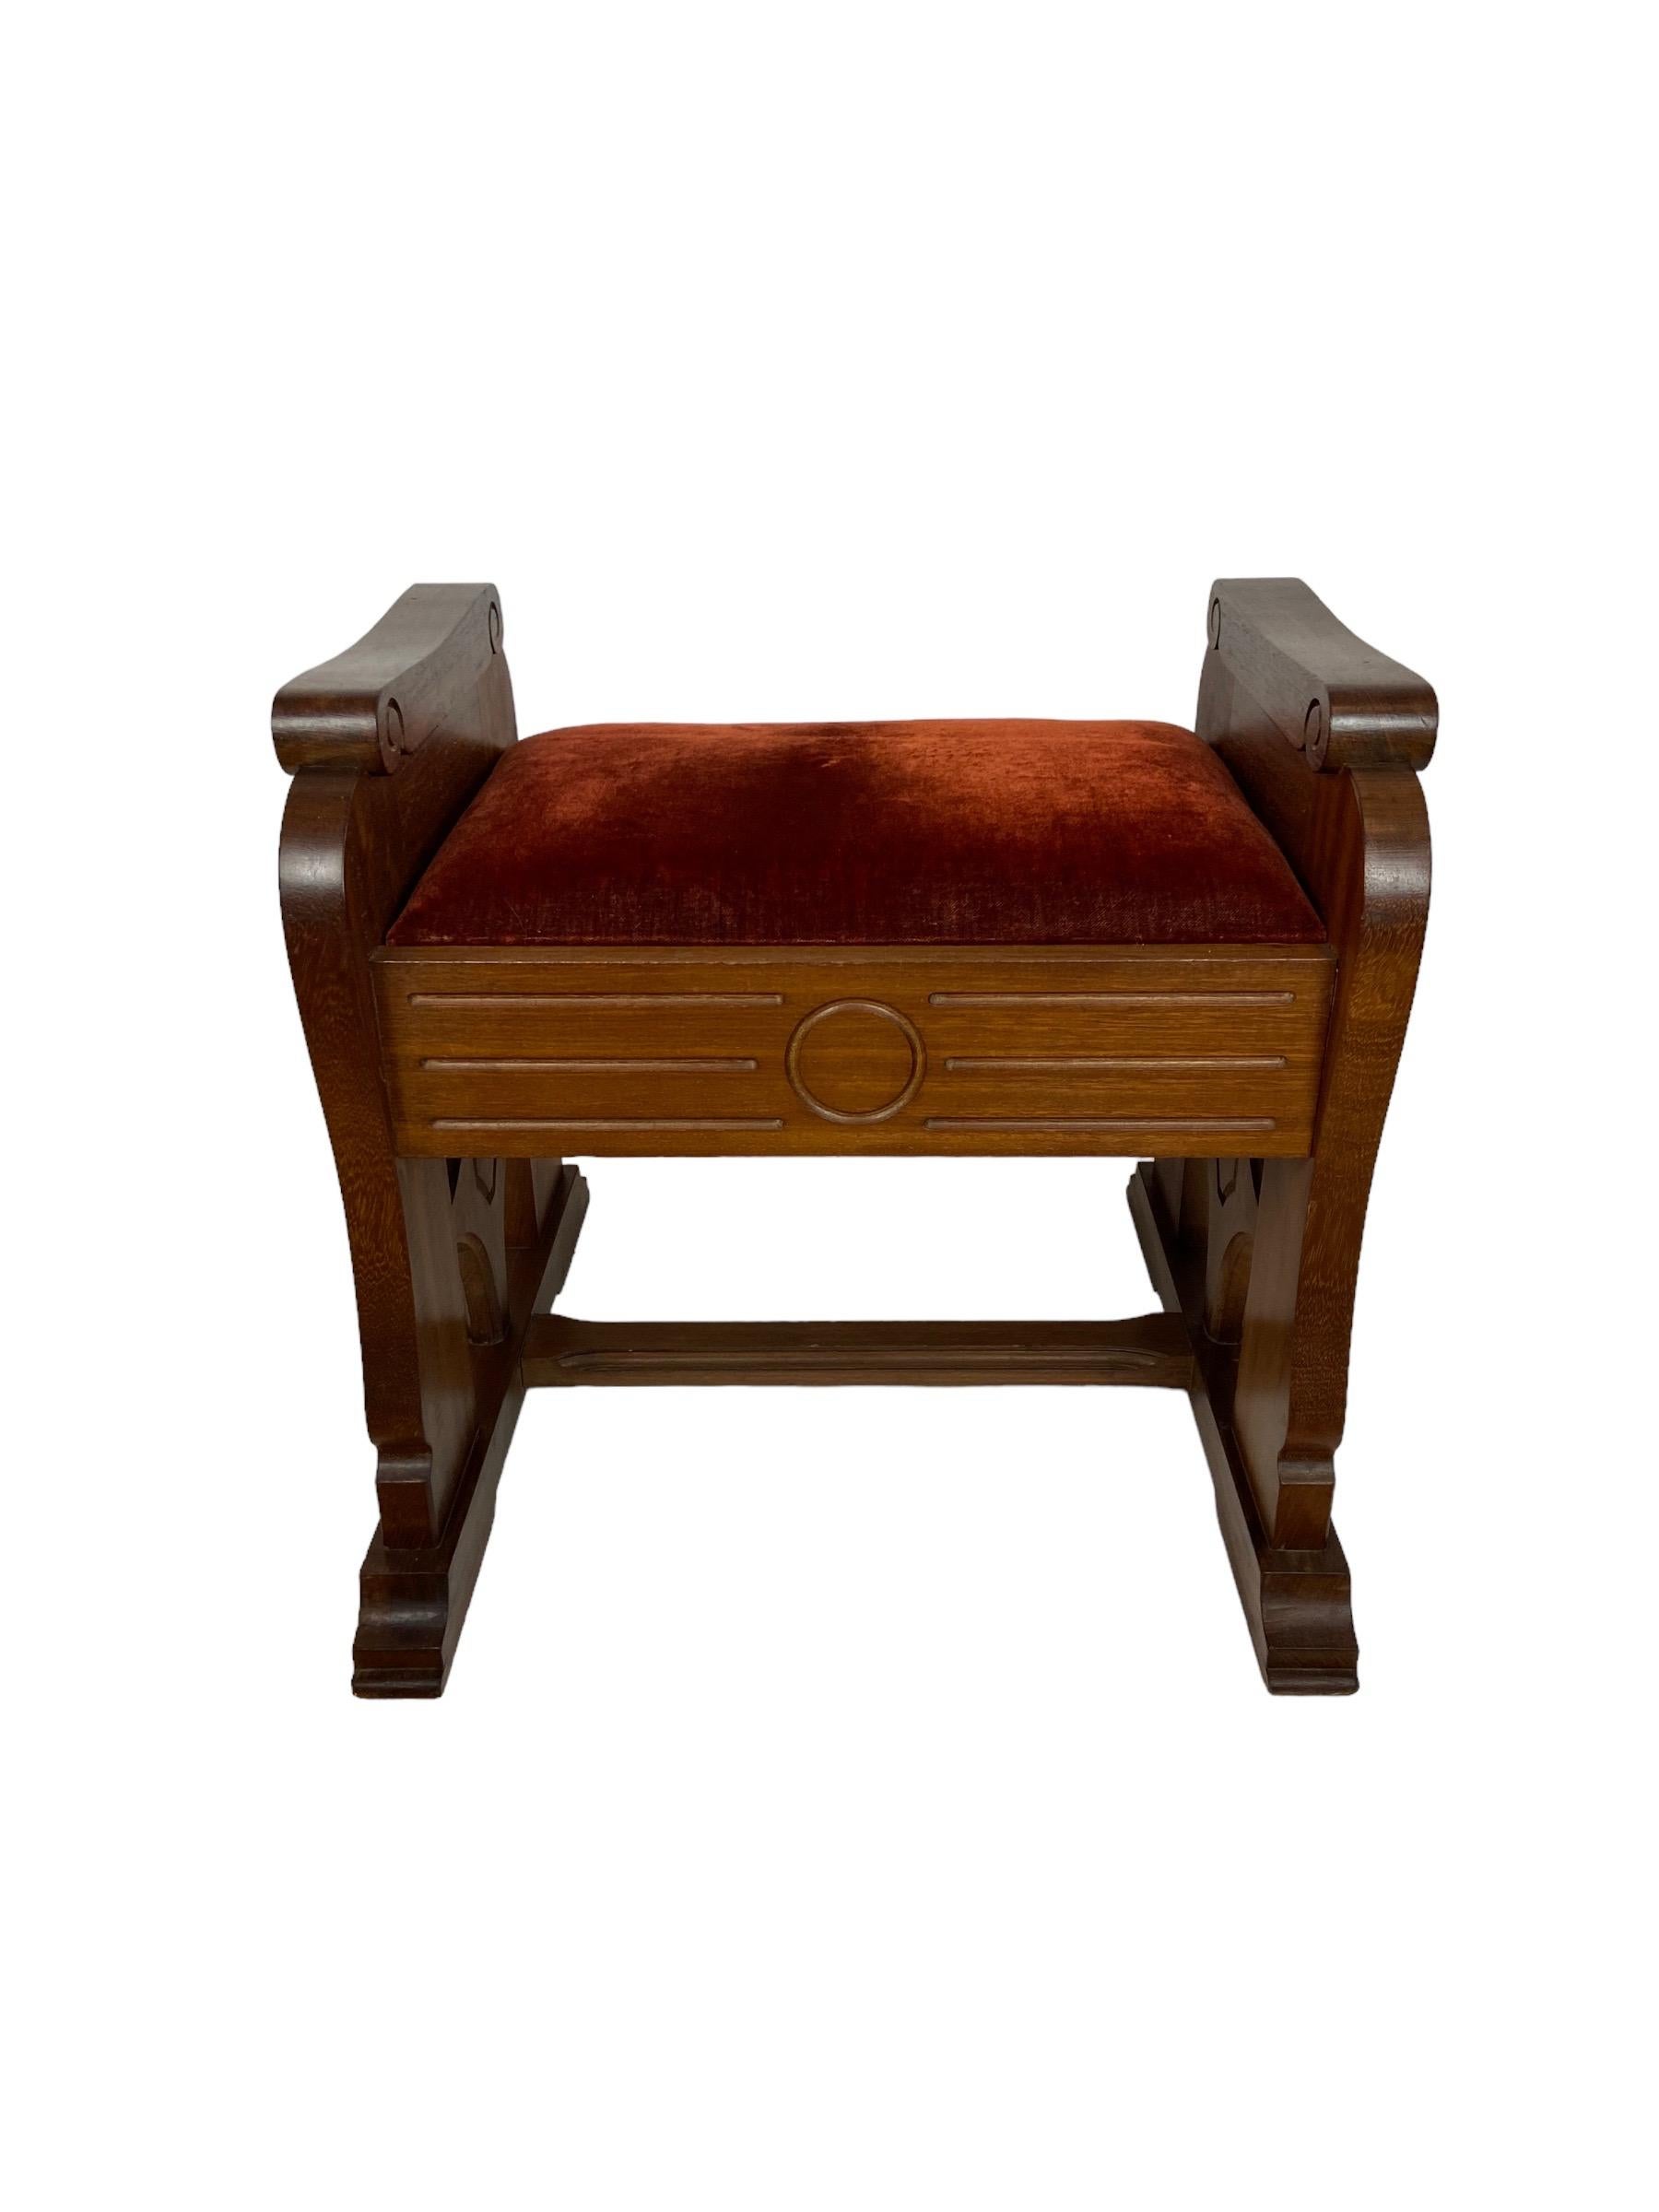 Art Deco Church Bench made of wood in The Netherlands in the 1950s.

Seat height 51 cm height 62 cm width 65 cm depth 51 cm.